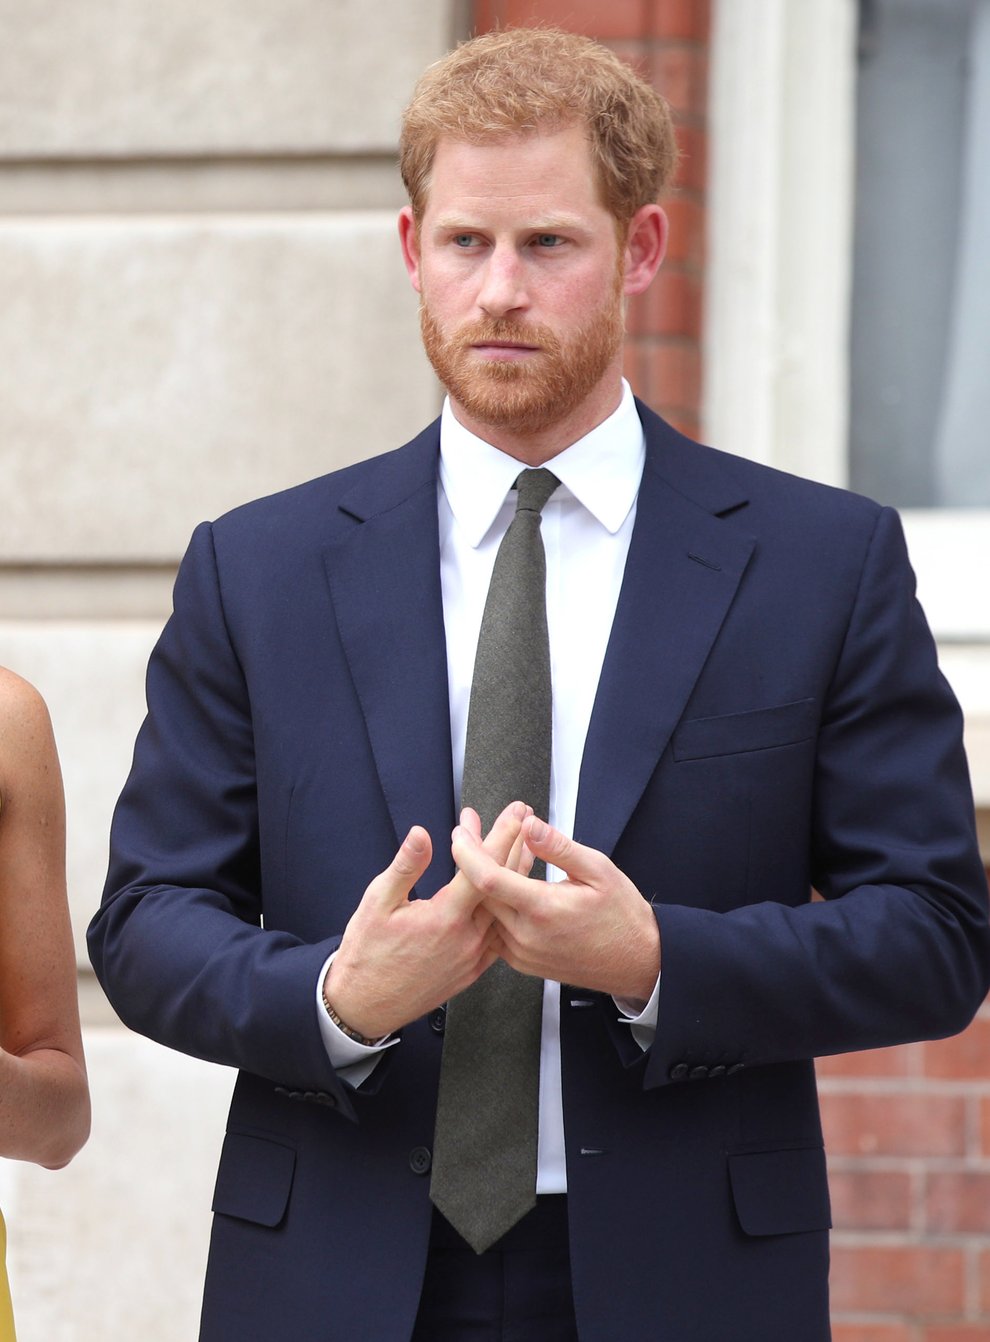 The Duke and Duchess of Sussex have signed a multi-year deal with audio streaming service Spotify to host and produce podcasts